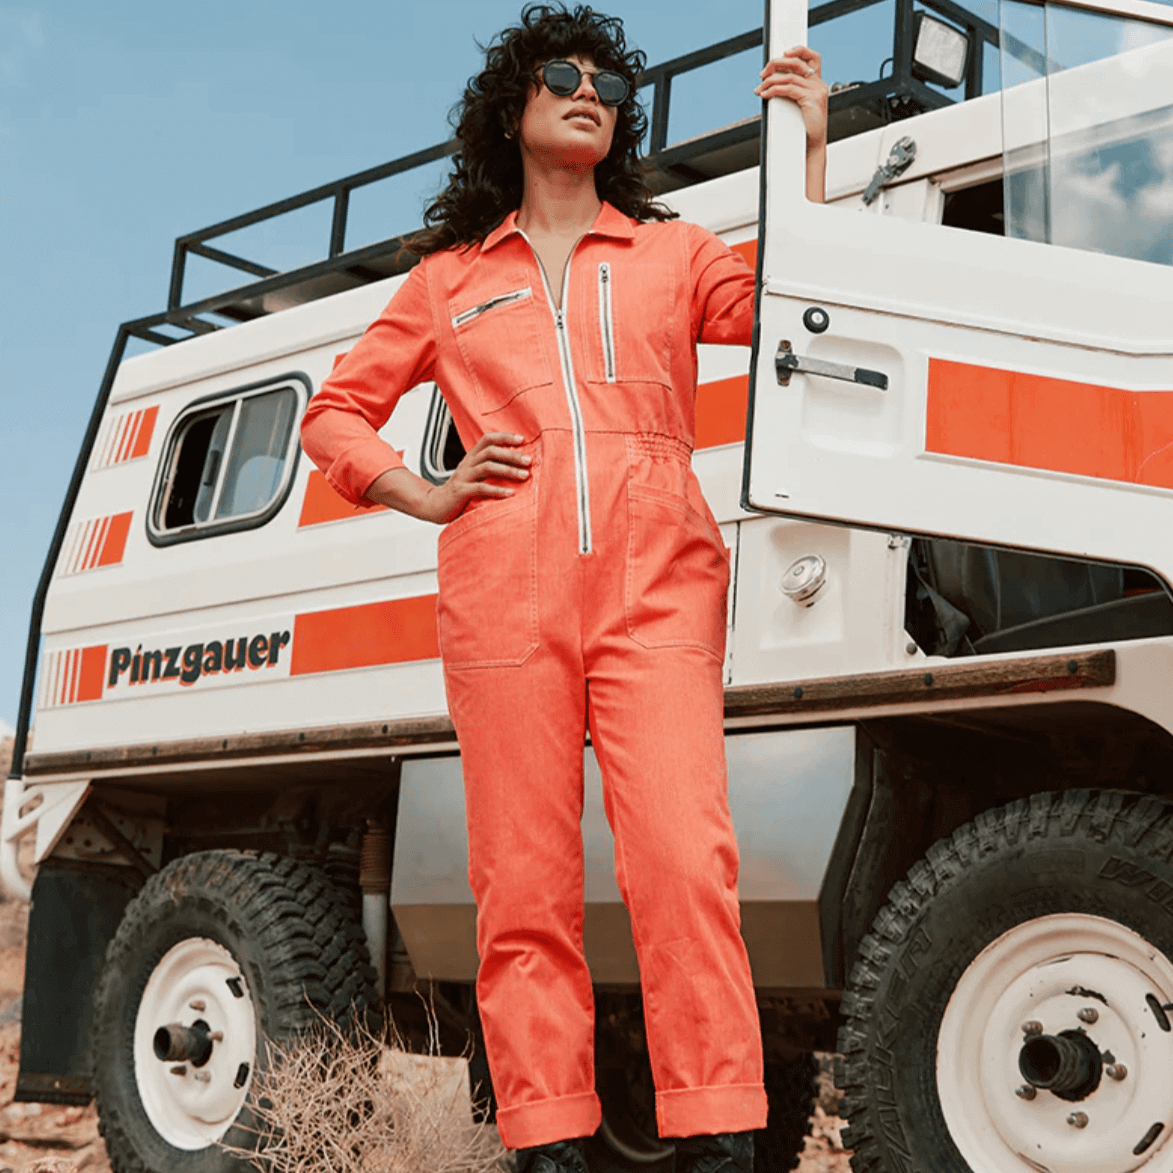 Atwyld Cadet Jumpsuit Female Model Relaxed Leaning on Classic Camper